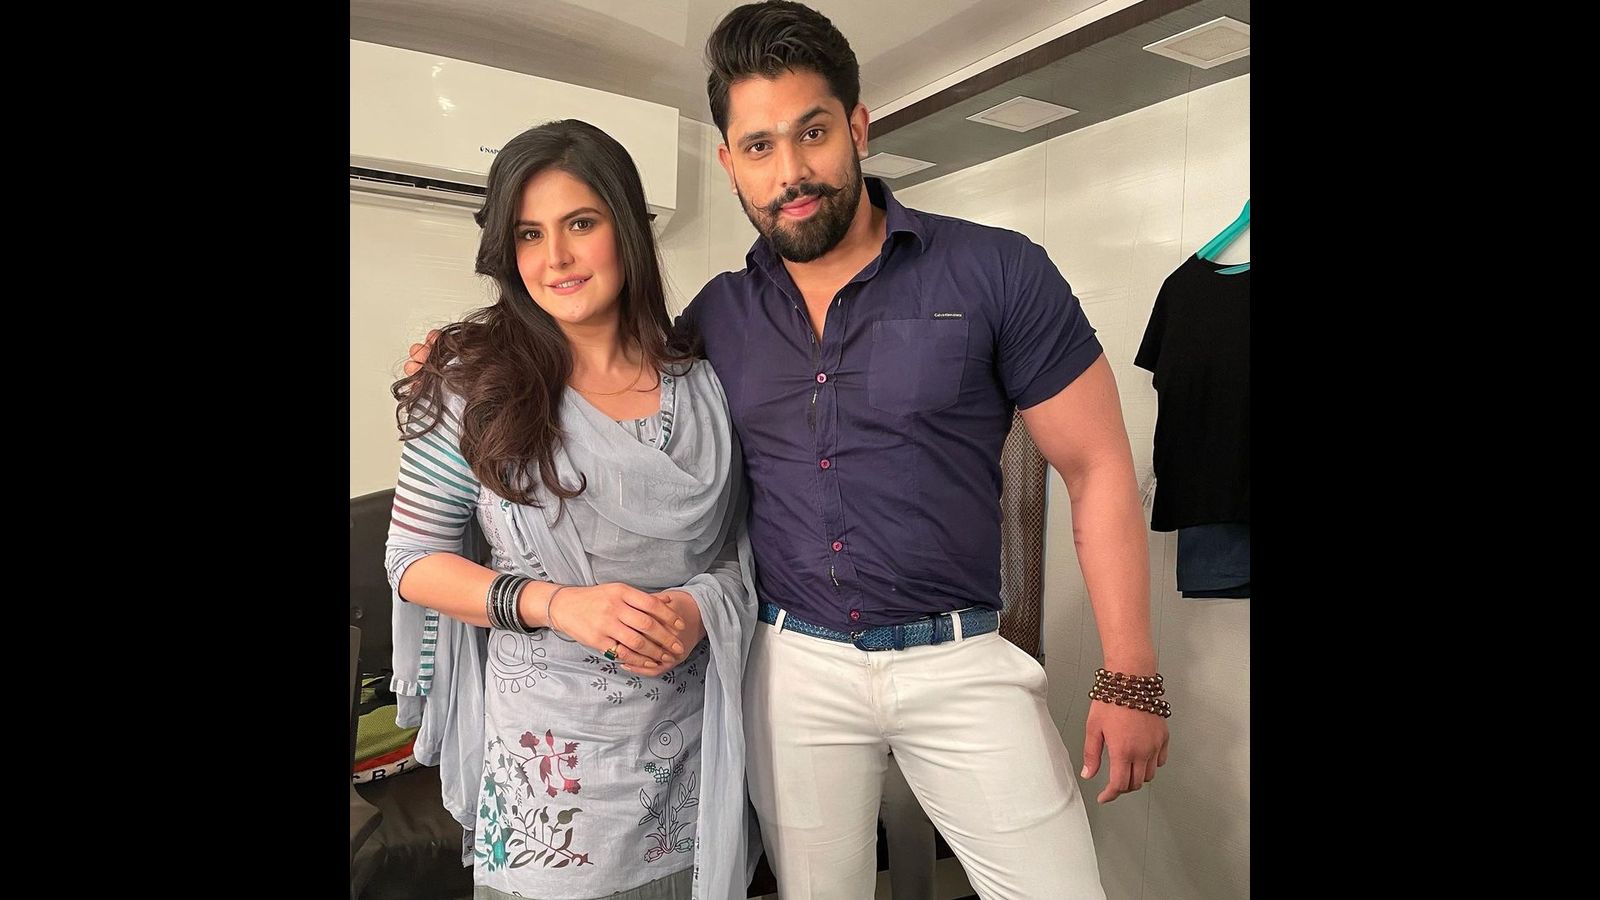 Jerin Khan Xxx - We are in a beautiful phase: Zareen Khan opens up on dating Bigg Boss fame  Shivashish Mishra | Bollywood - Hindustan Times